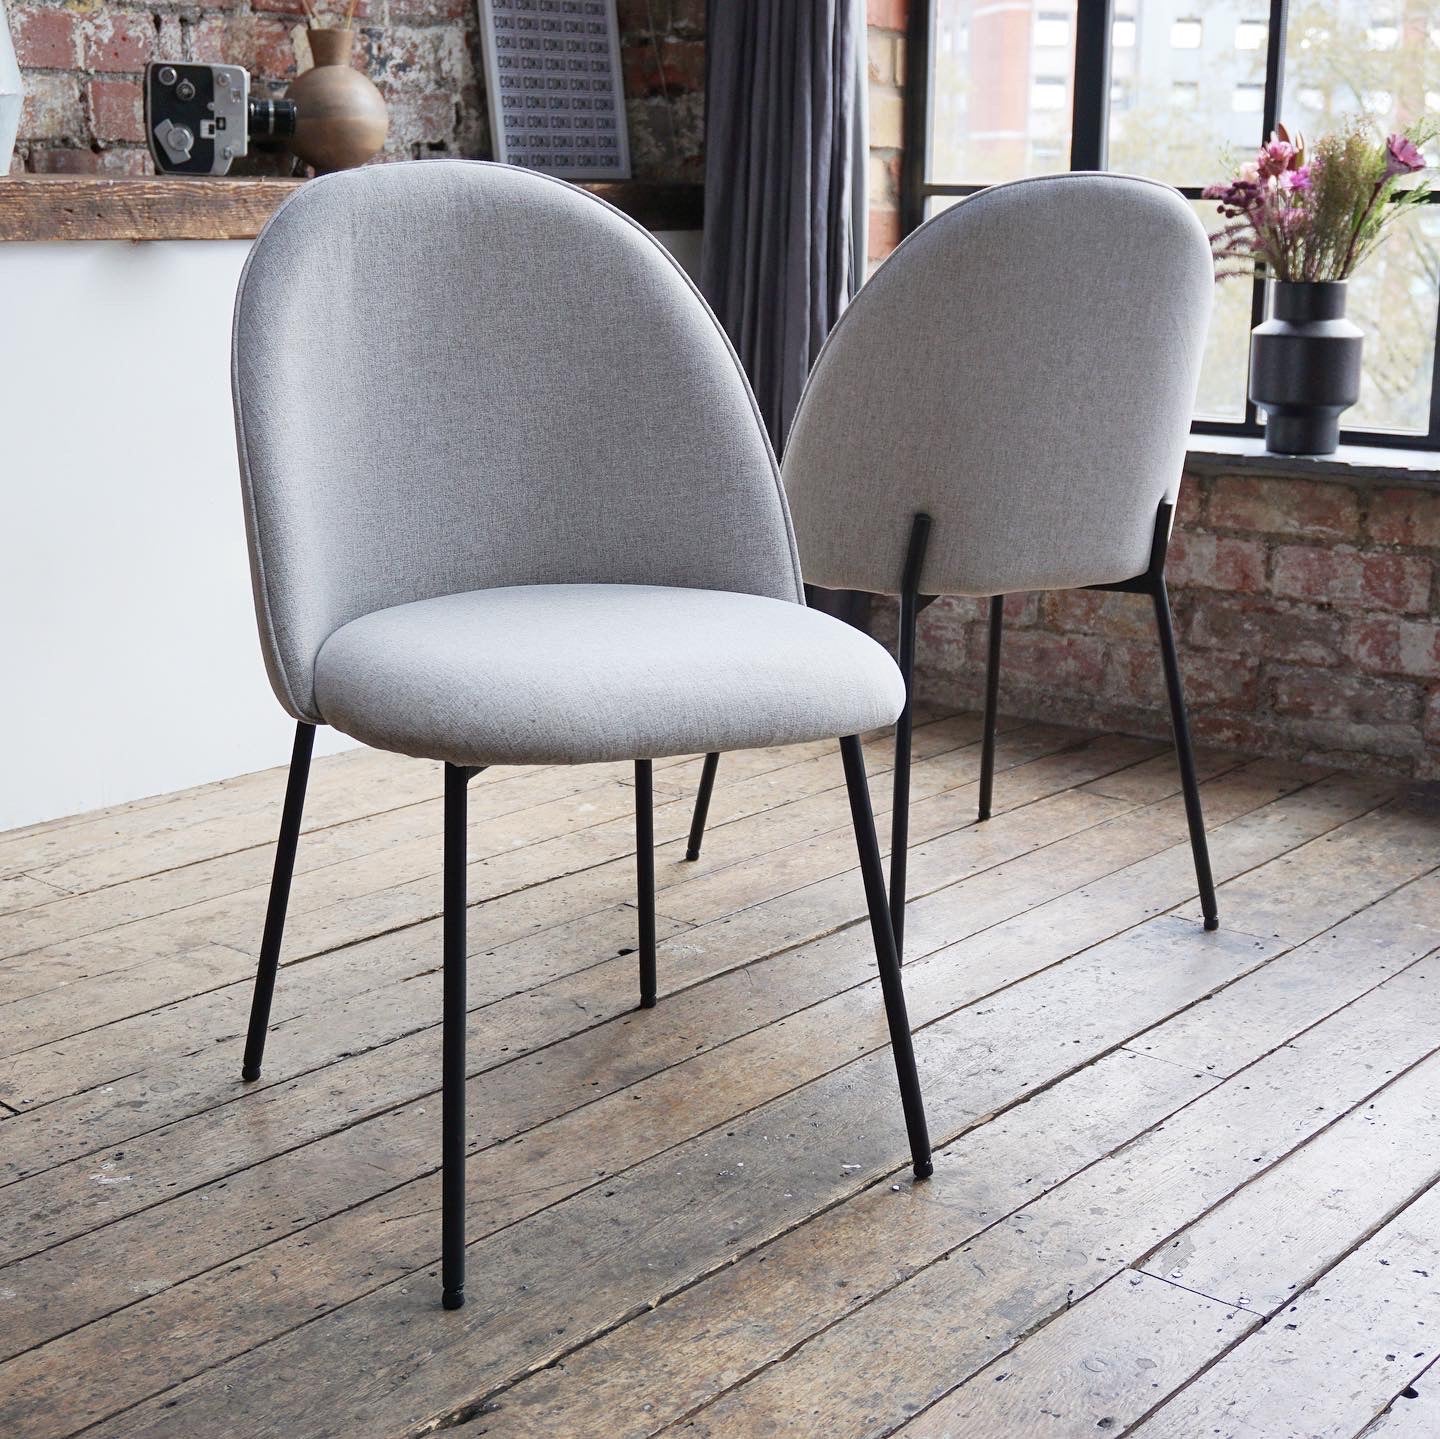 Anastasia Dining Chairs in Stone (2pk)